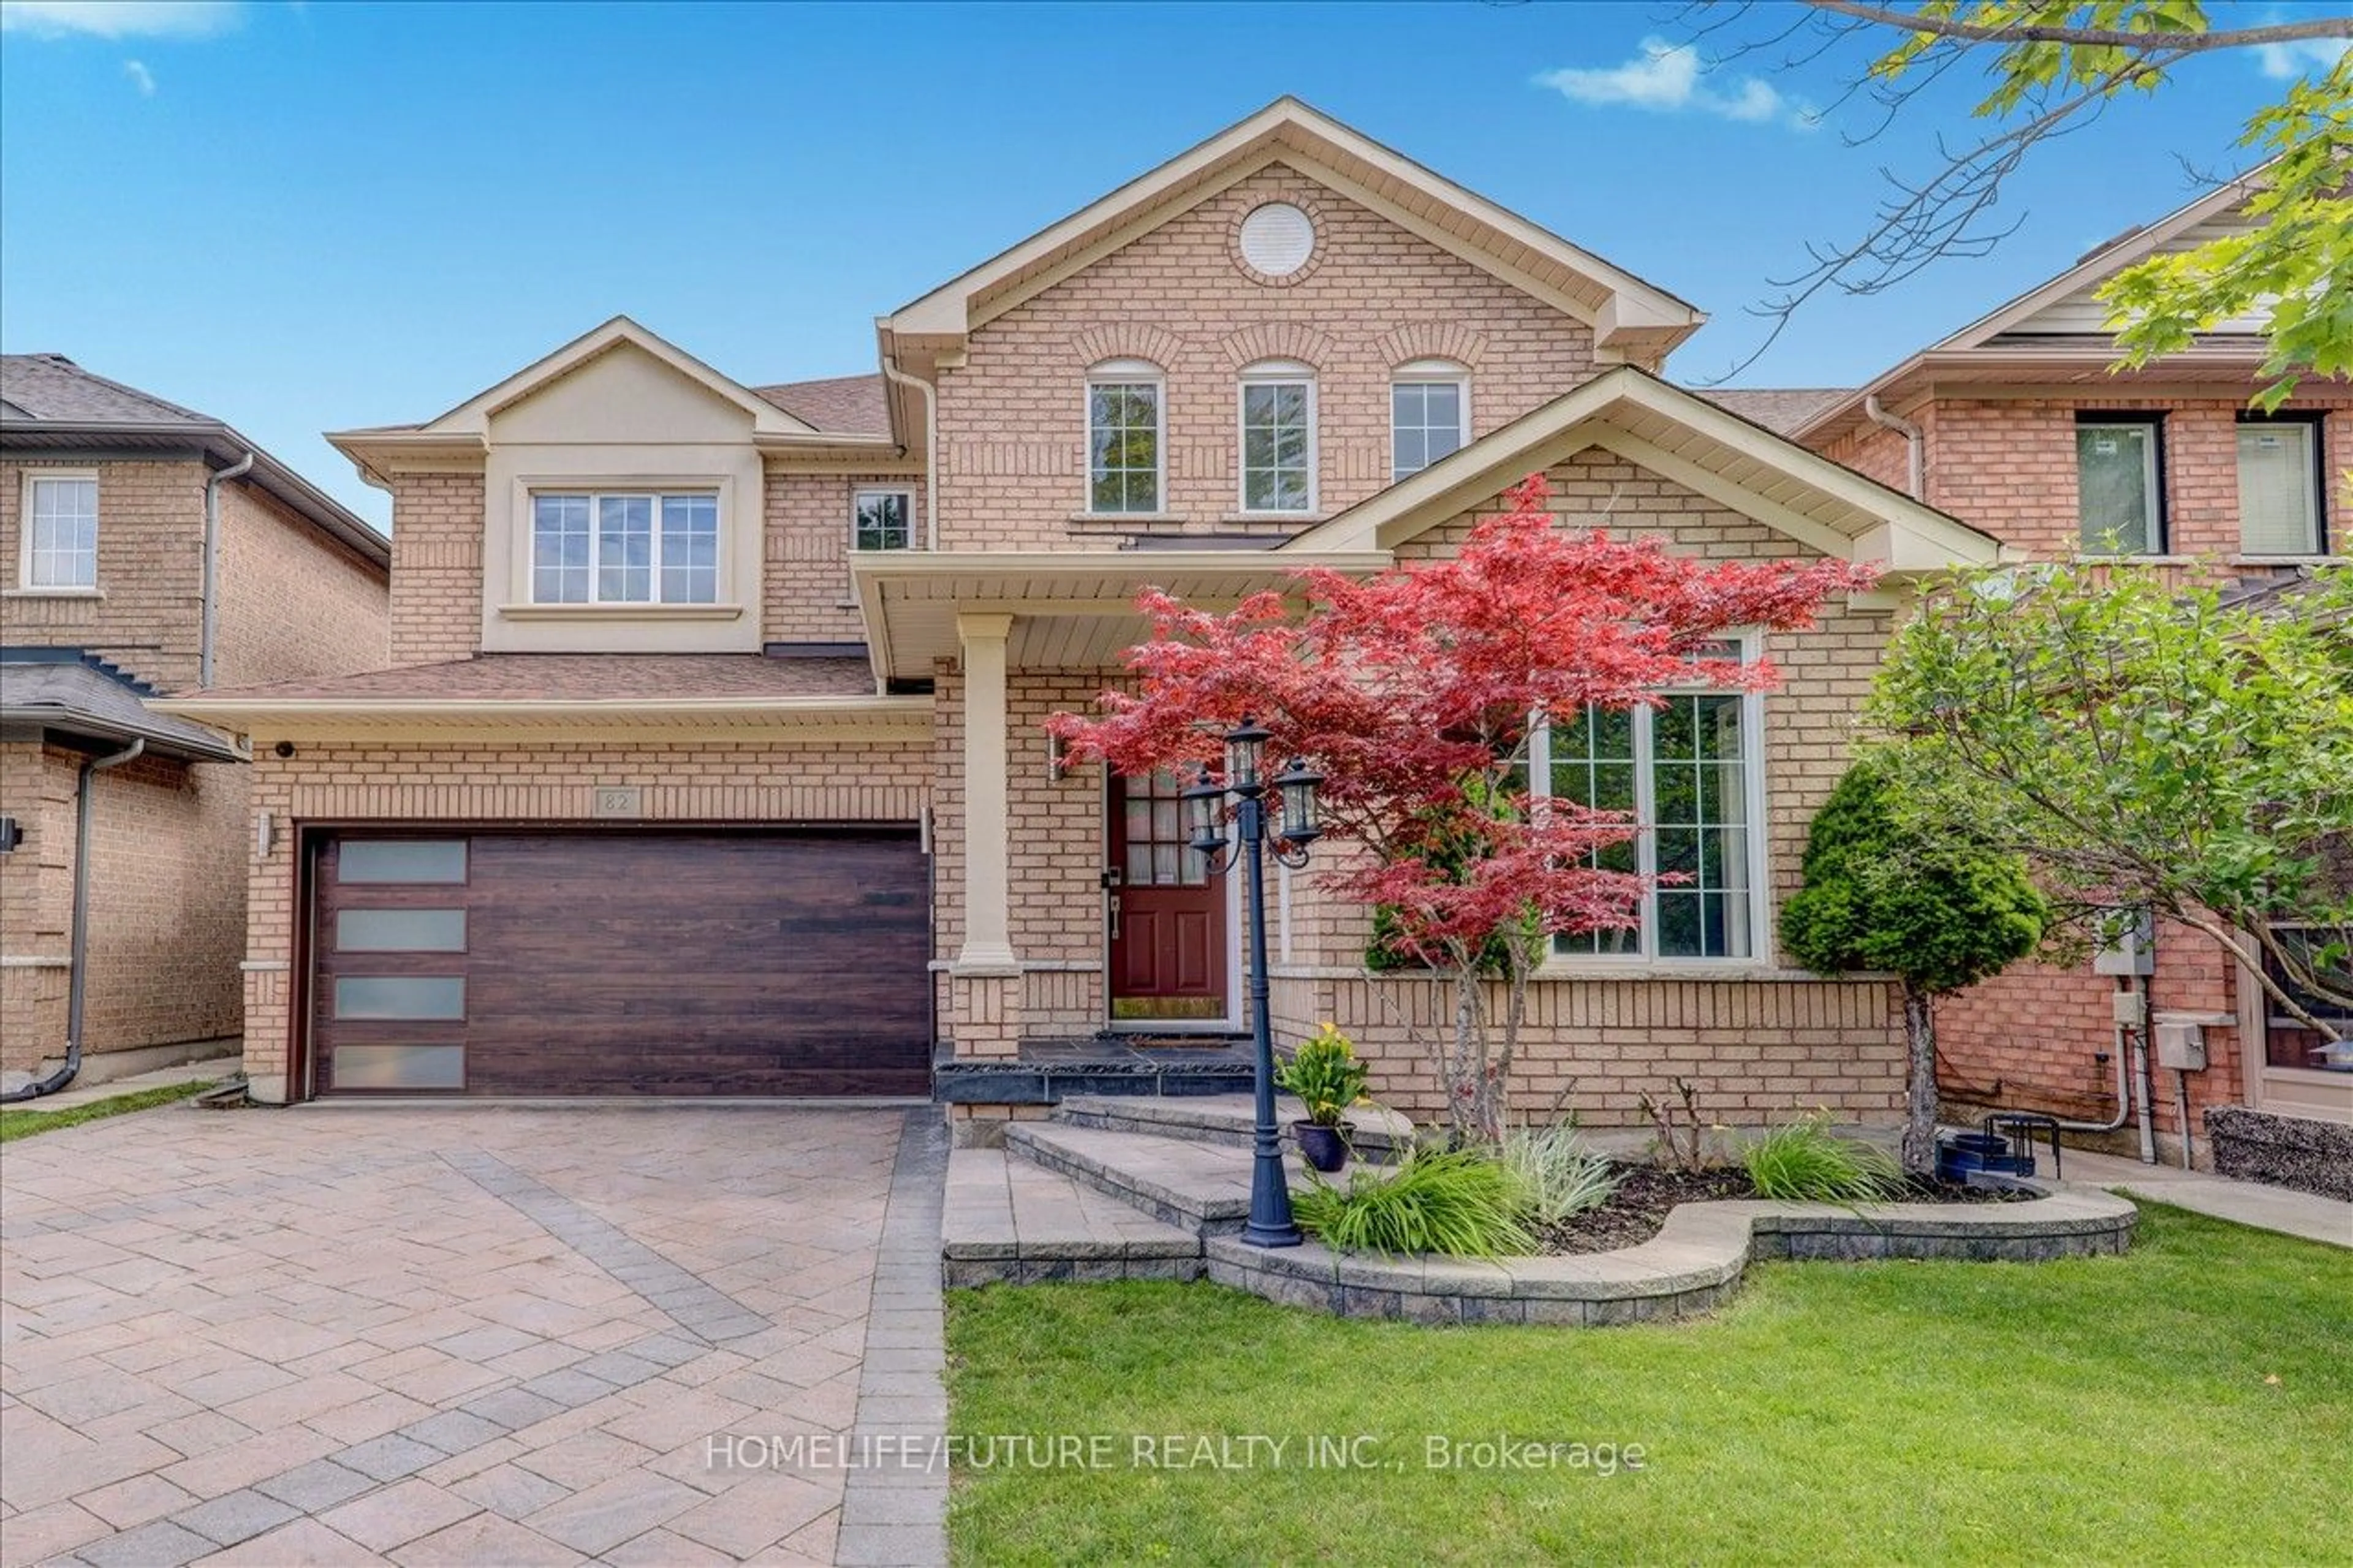 Home with brick exterior material for 82 Lemsford Dr, Markham Ontario L3S 4H5